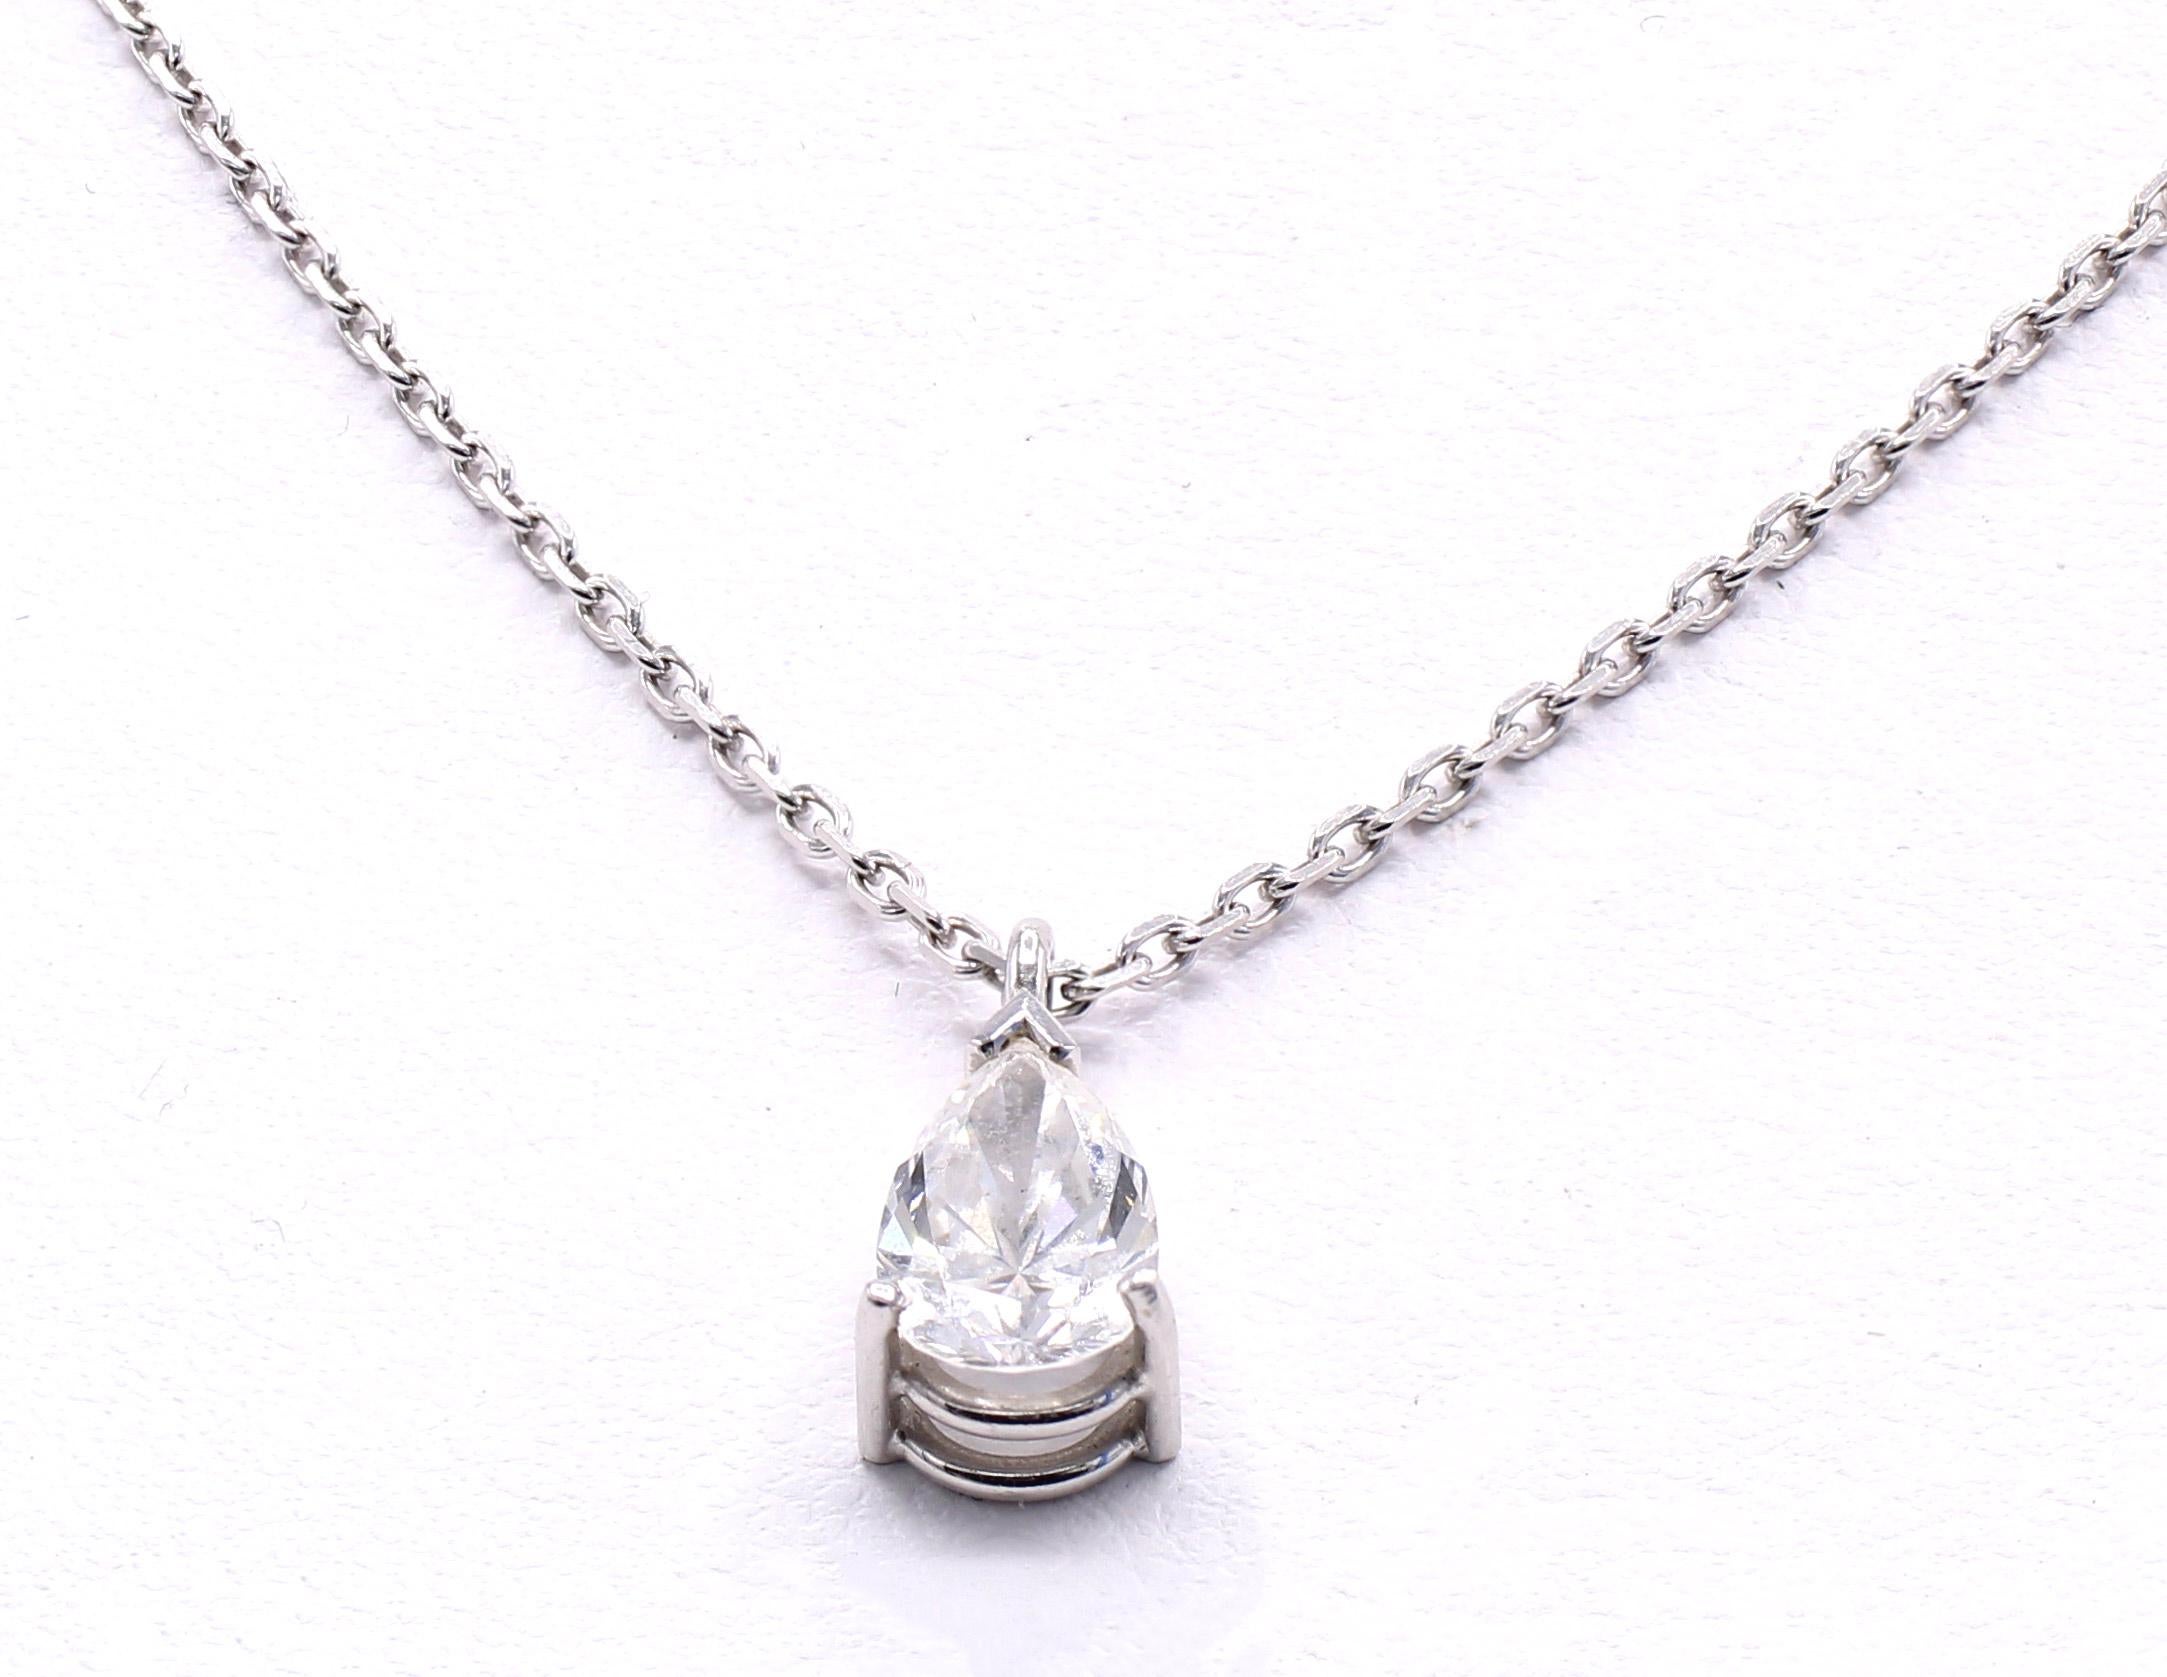 Beautifully handcrafted in 18 karat white gold, by the renown Swiss jeweler Gubelin, this charming and most wearable pendant necklace features a white bright and sparkly pear shape diamond weighing approximately 0.75 carats. The pendant is